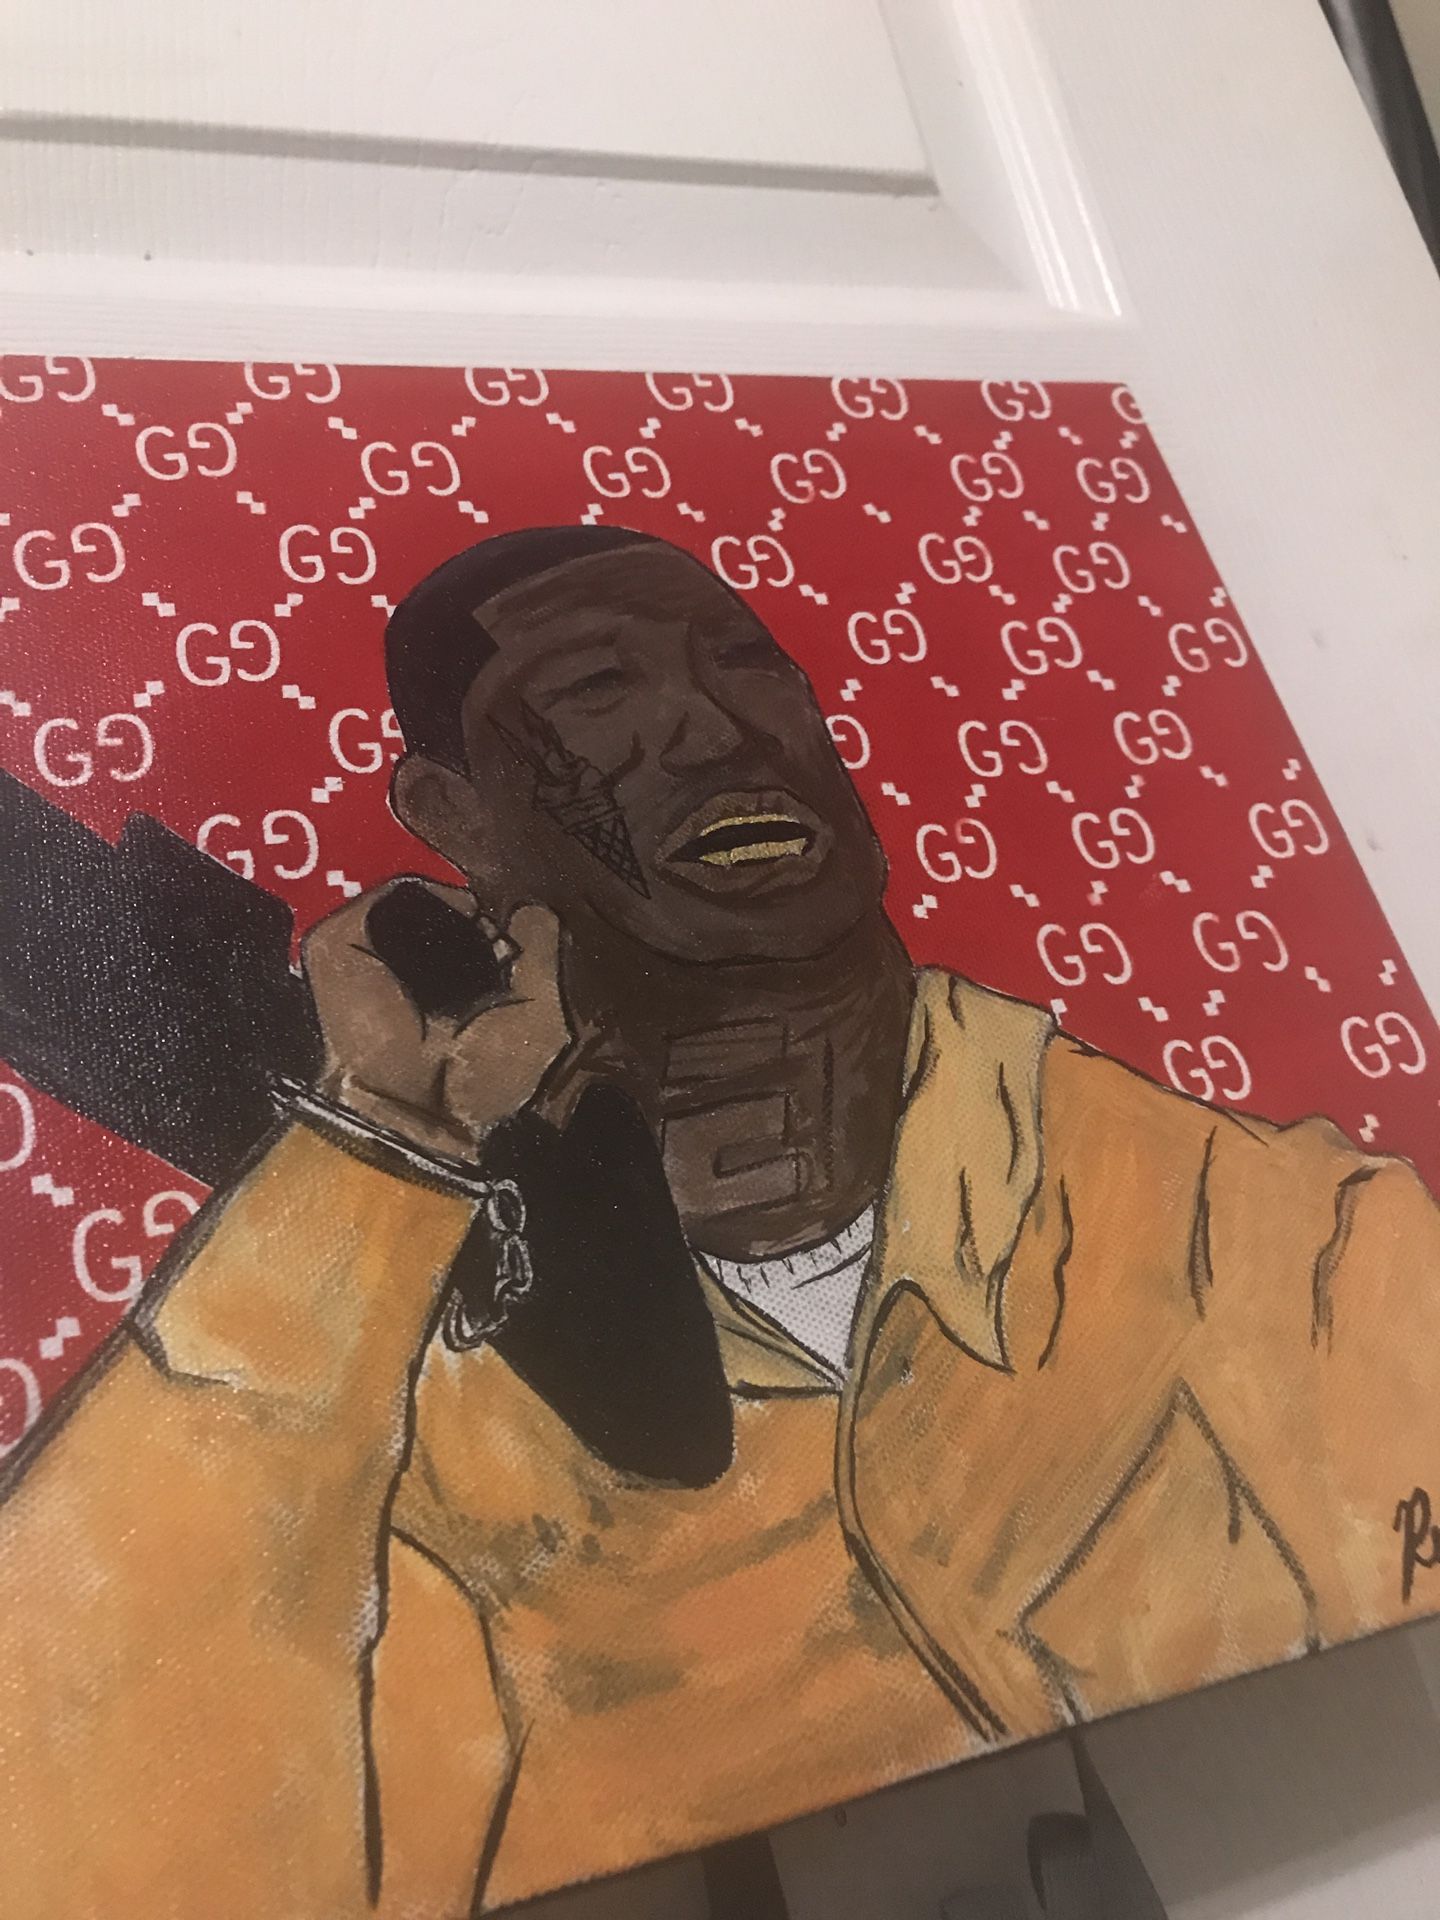 Gucci painting